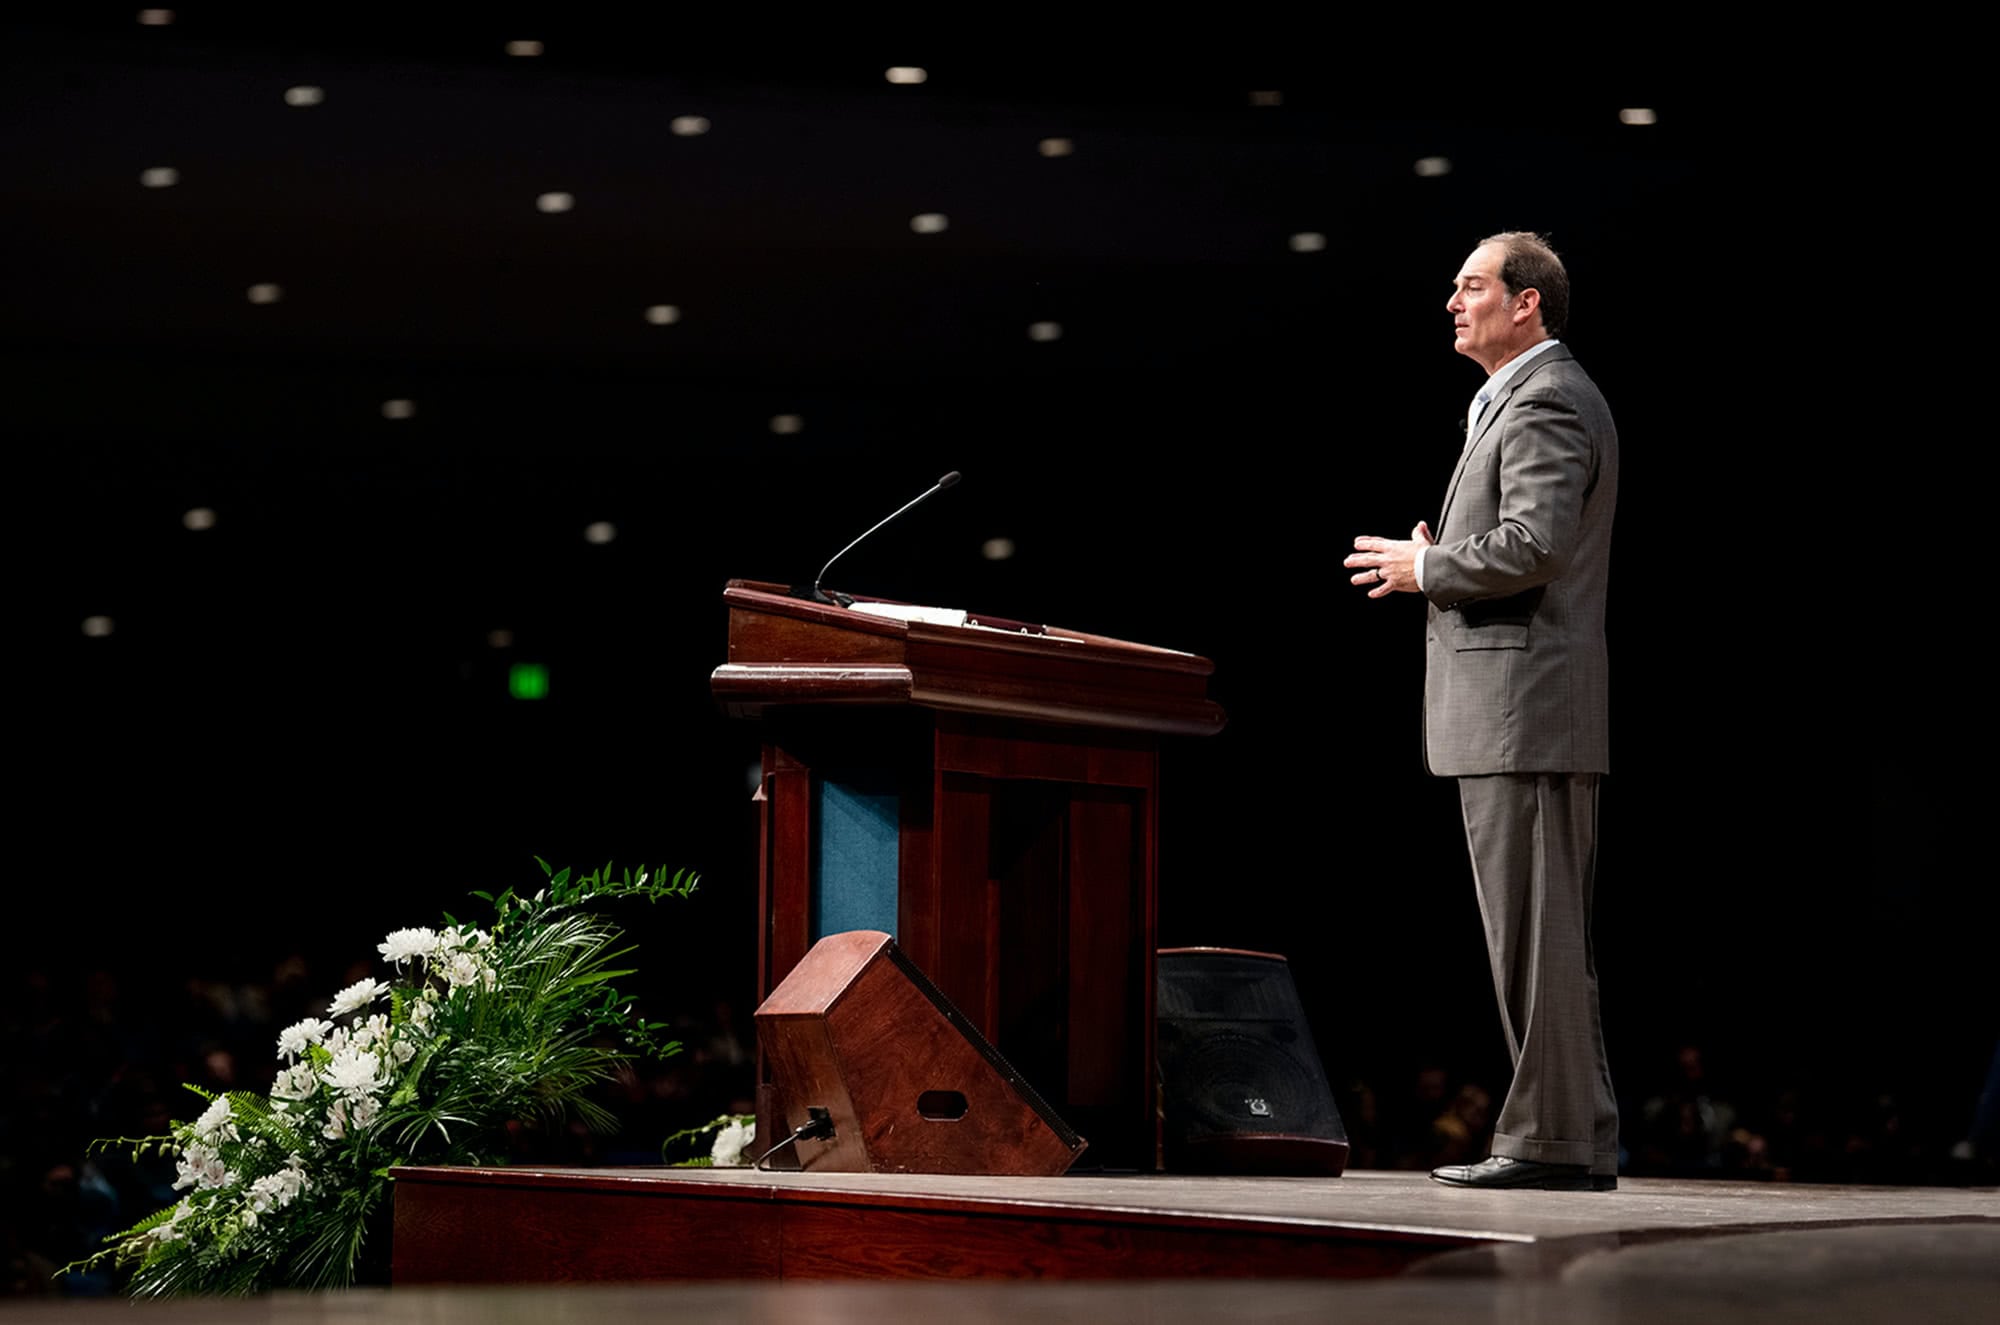 Rusty Smith preaching at PCC Bible Conference